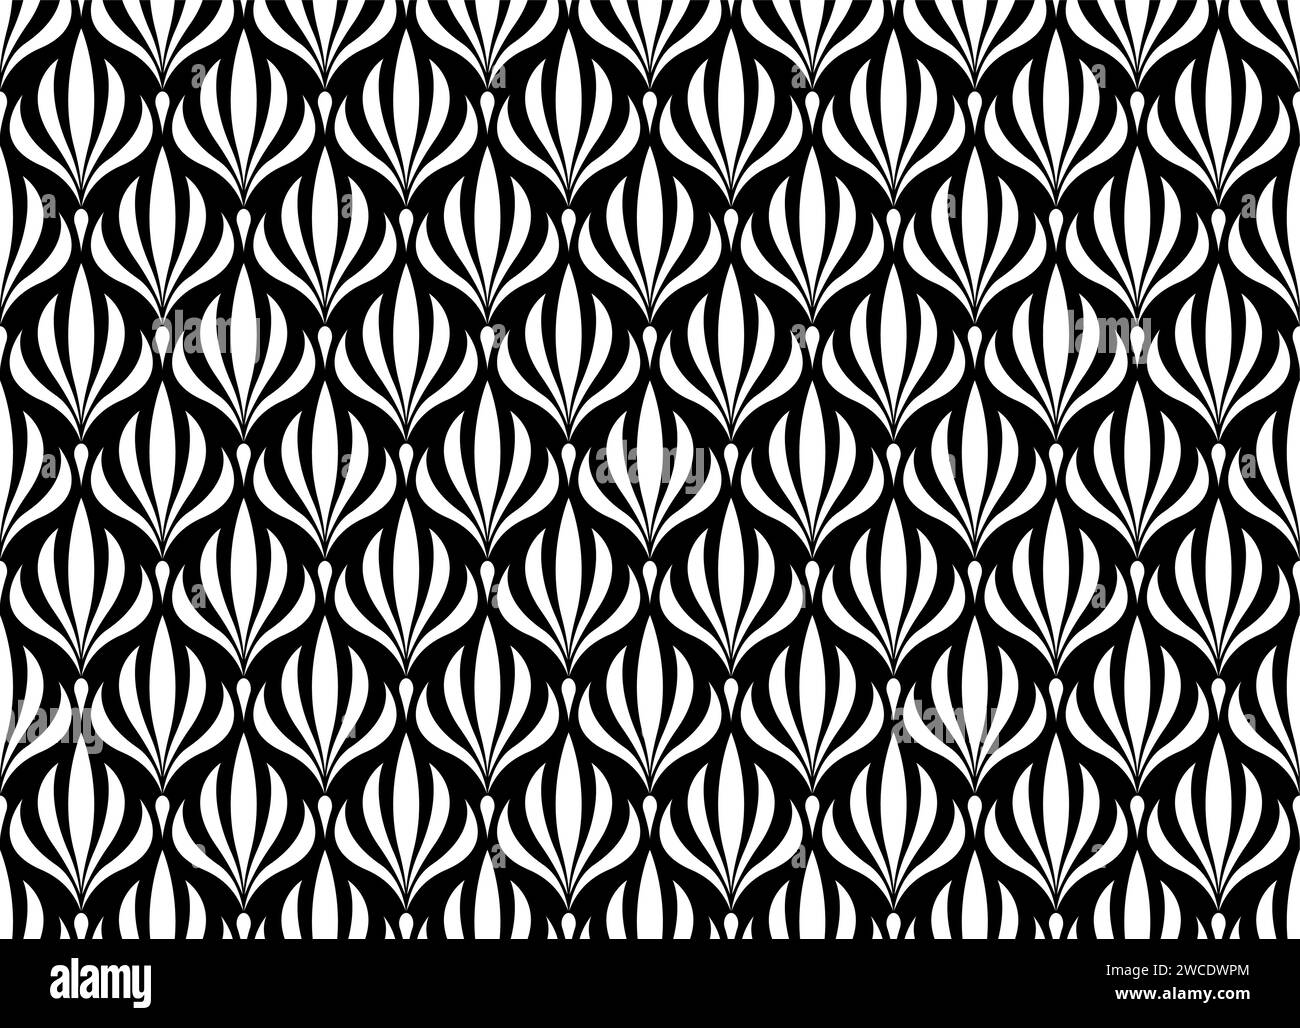 Floral seamless pattern. Retro stylish geometric texture background with white Art Nouveau tiles. Vector geometric decorative leaves texture isolated Stock Vector